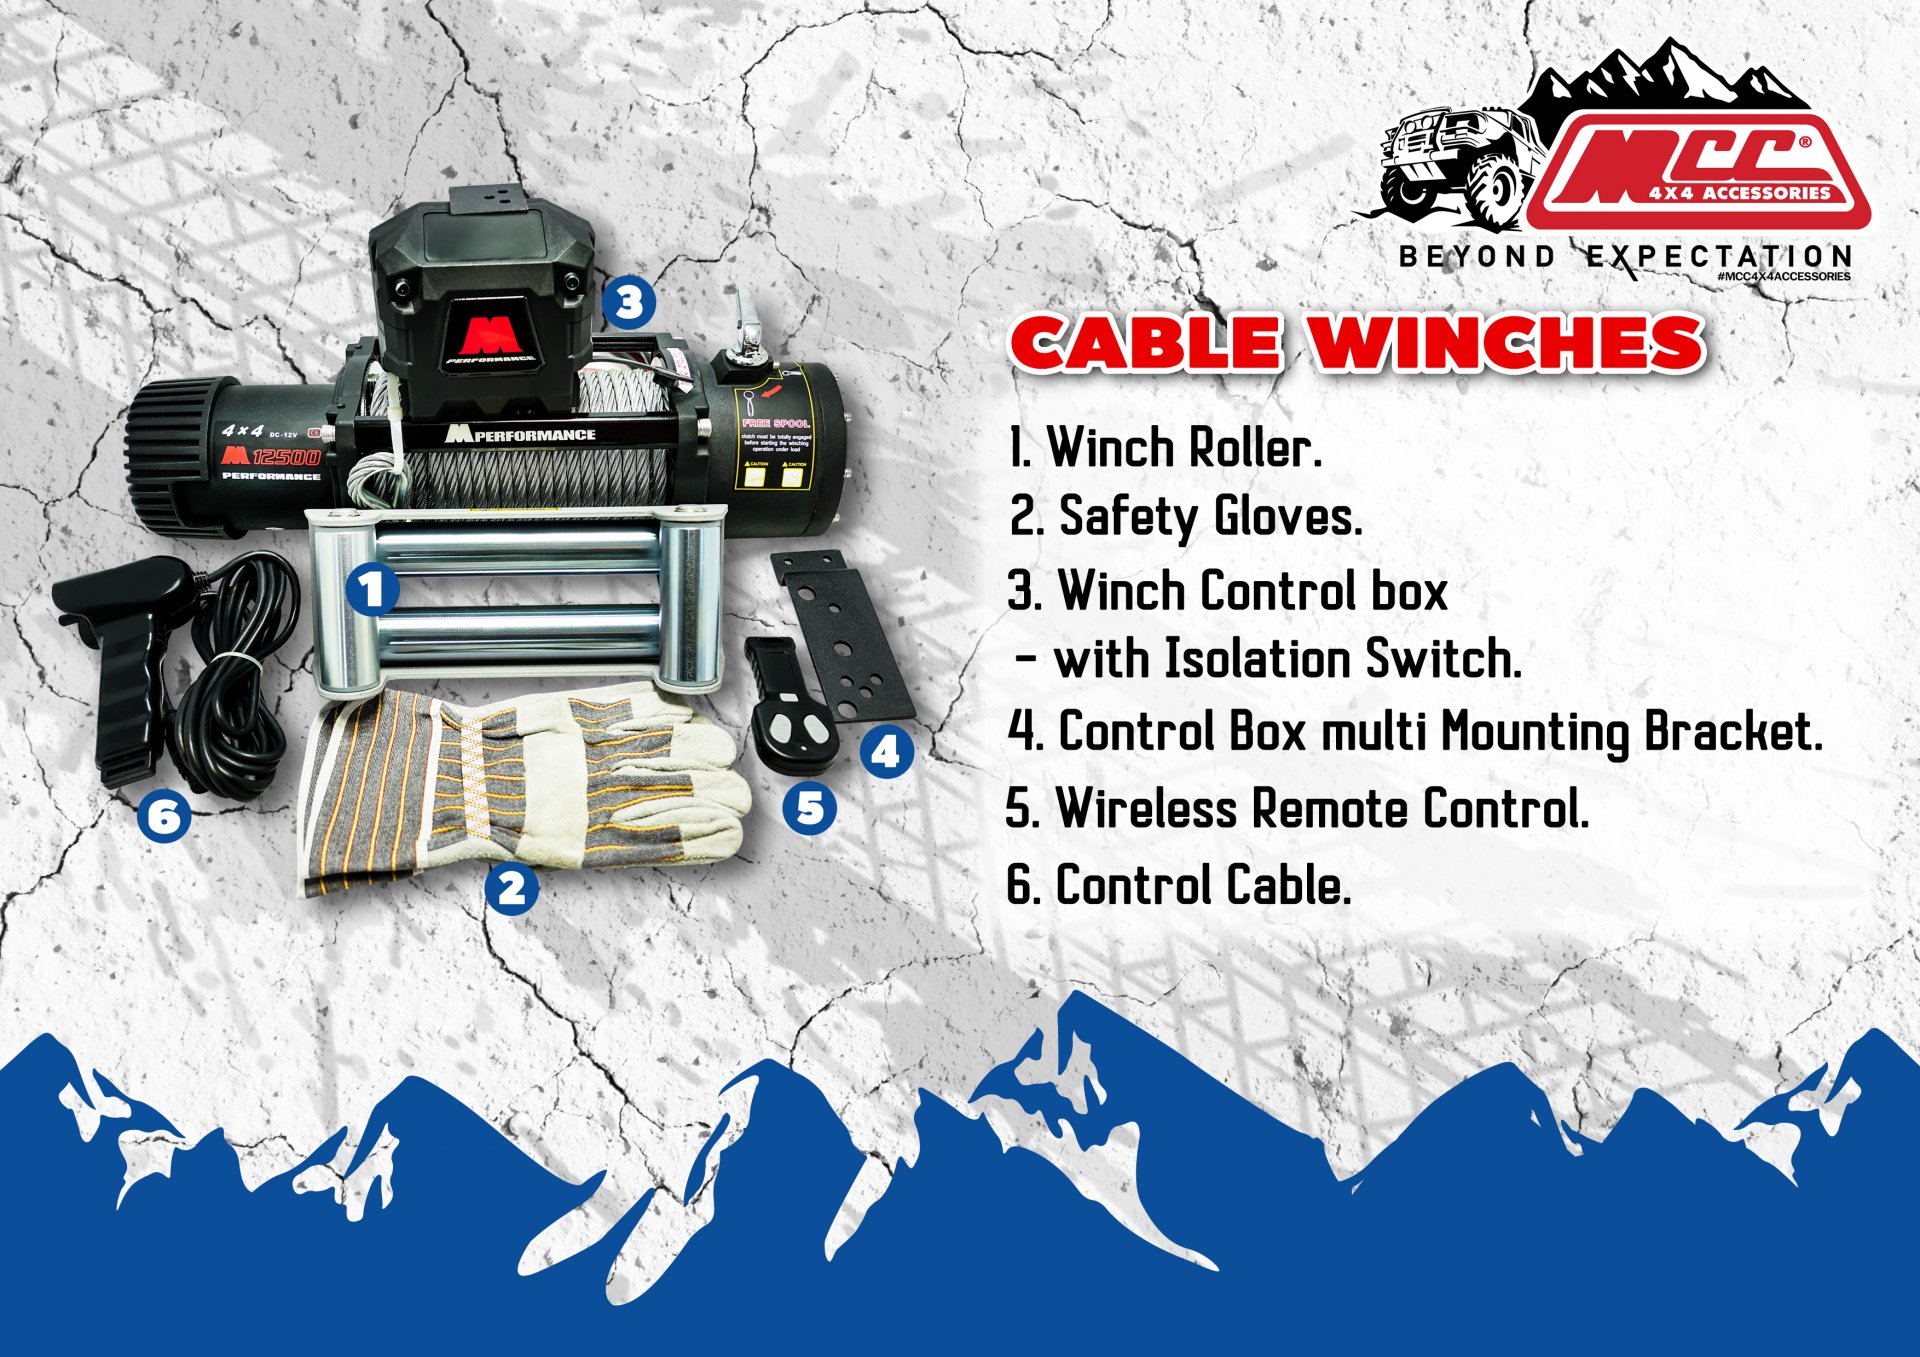 CABLE WINCHES